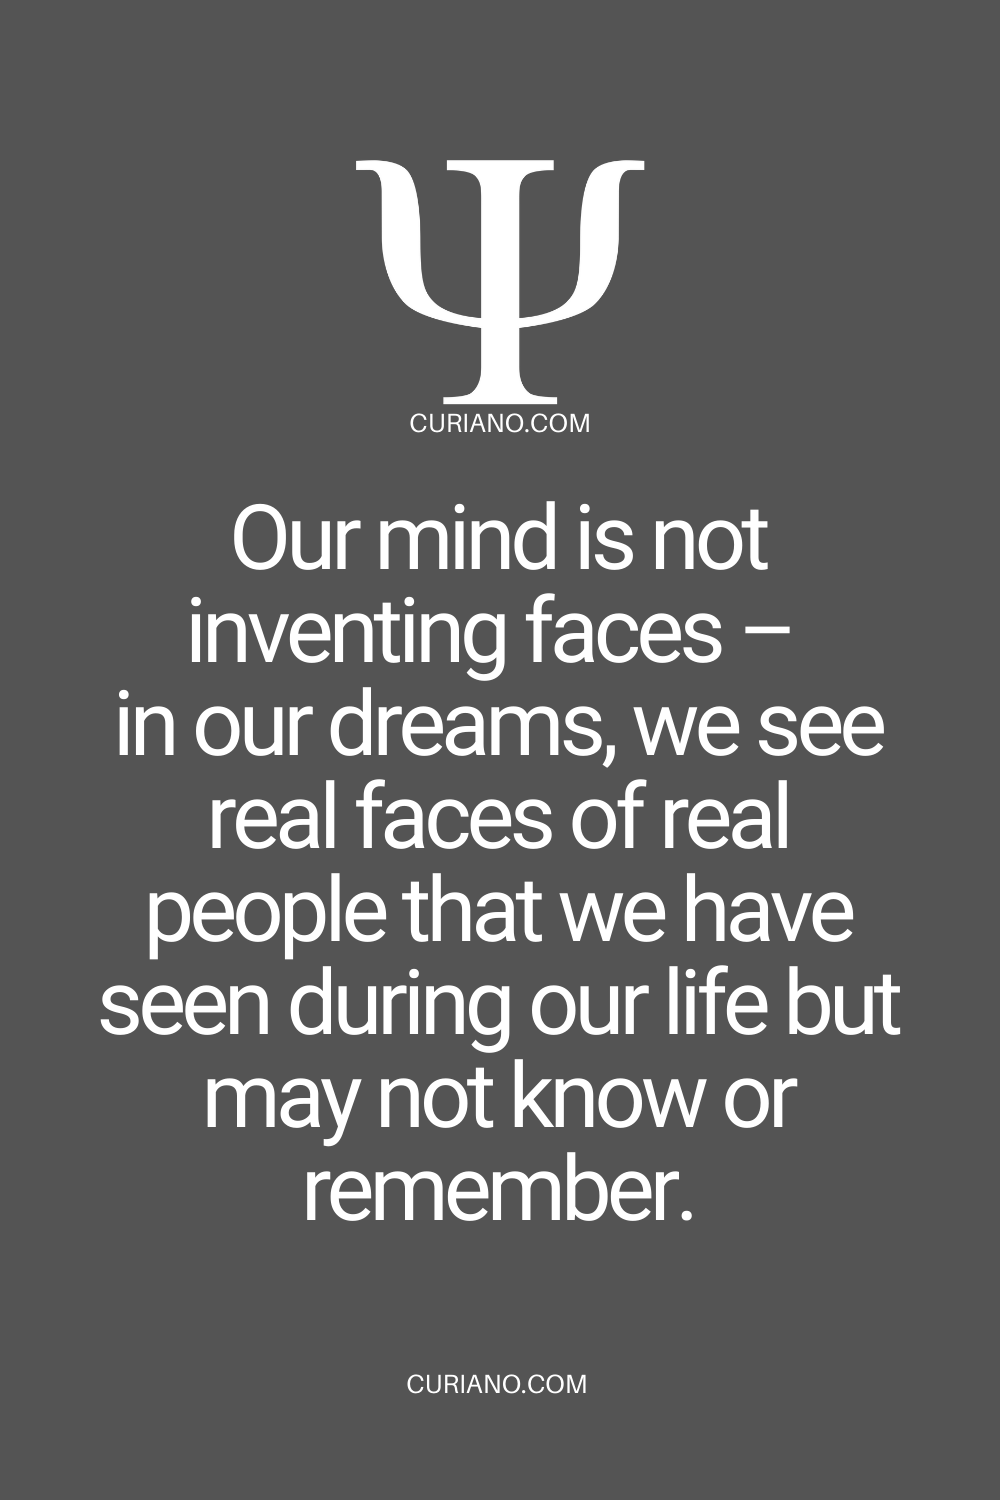 Our mind is not inventing faces – in our dreams, we see real faces of real people that we have seen during our life but may not know or remember.